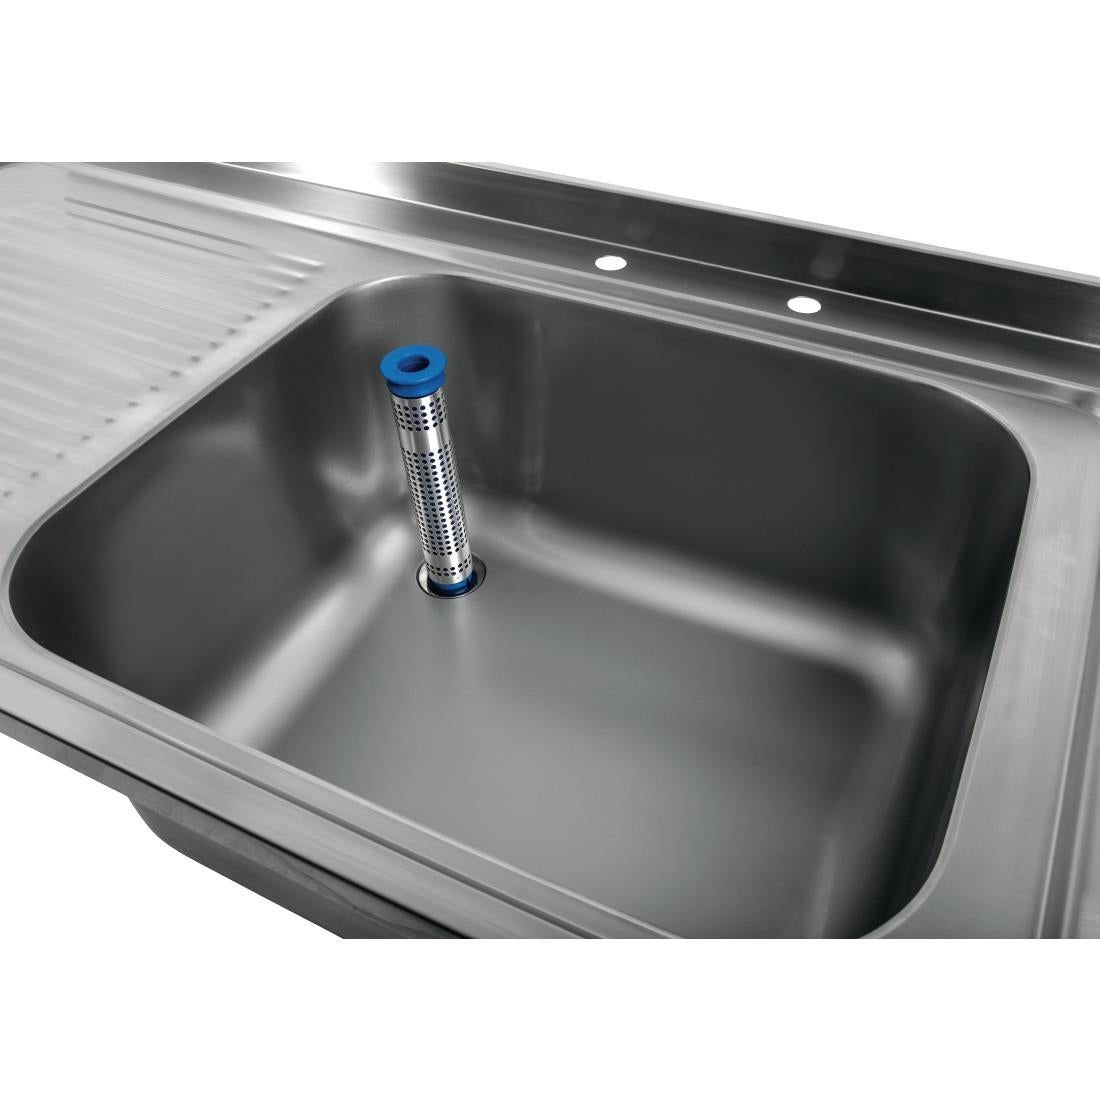 DR383 Holmes Fully Assembled Stainless Steel Sink Left Hand Drainer 1200mm JD Catering Equipment Solutions Ltd